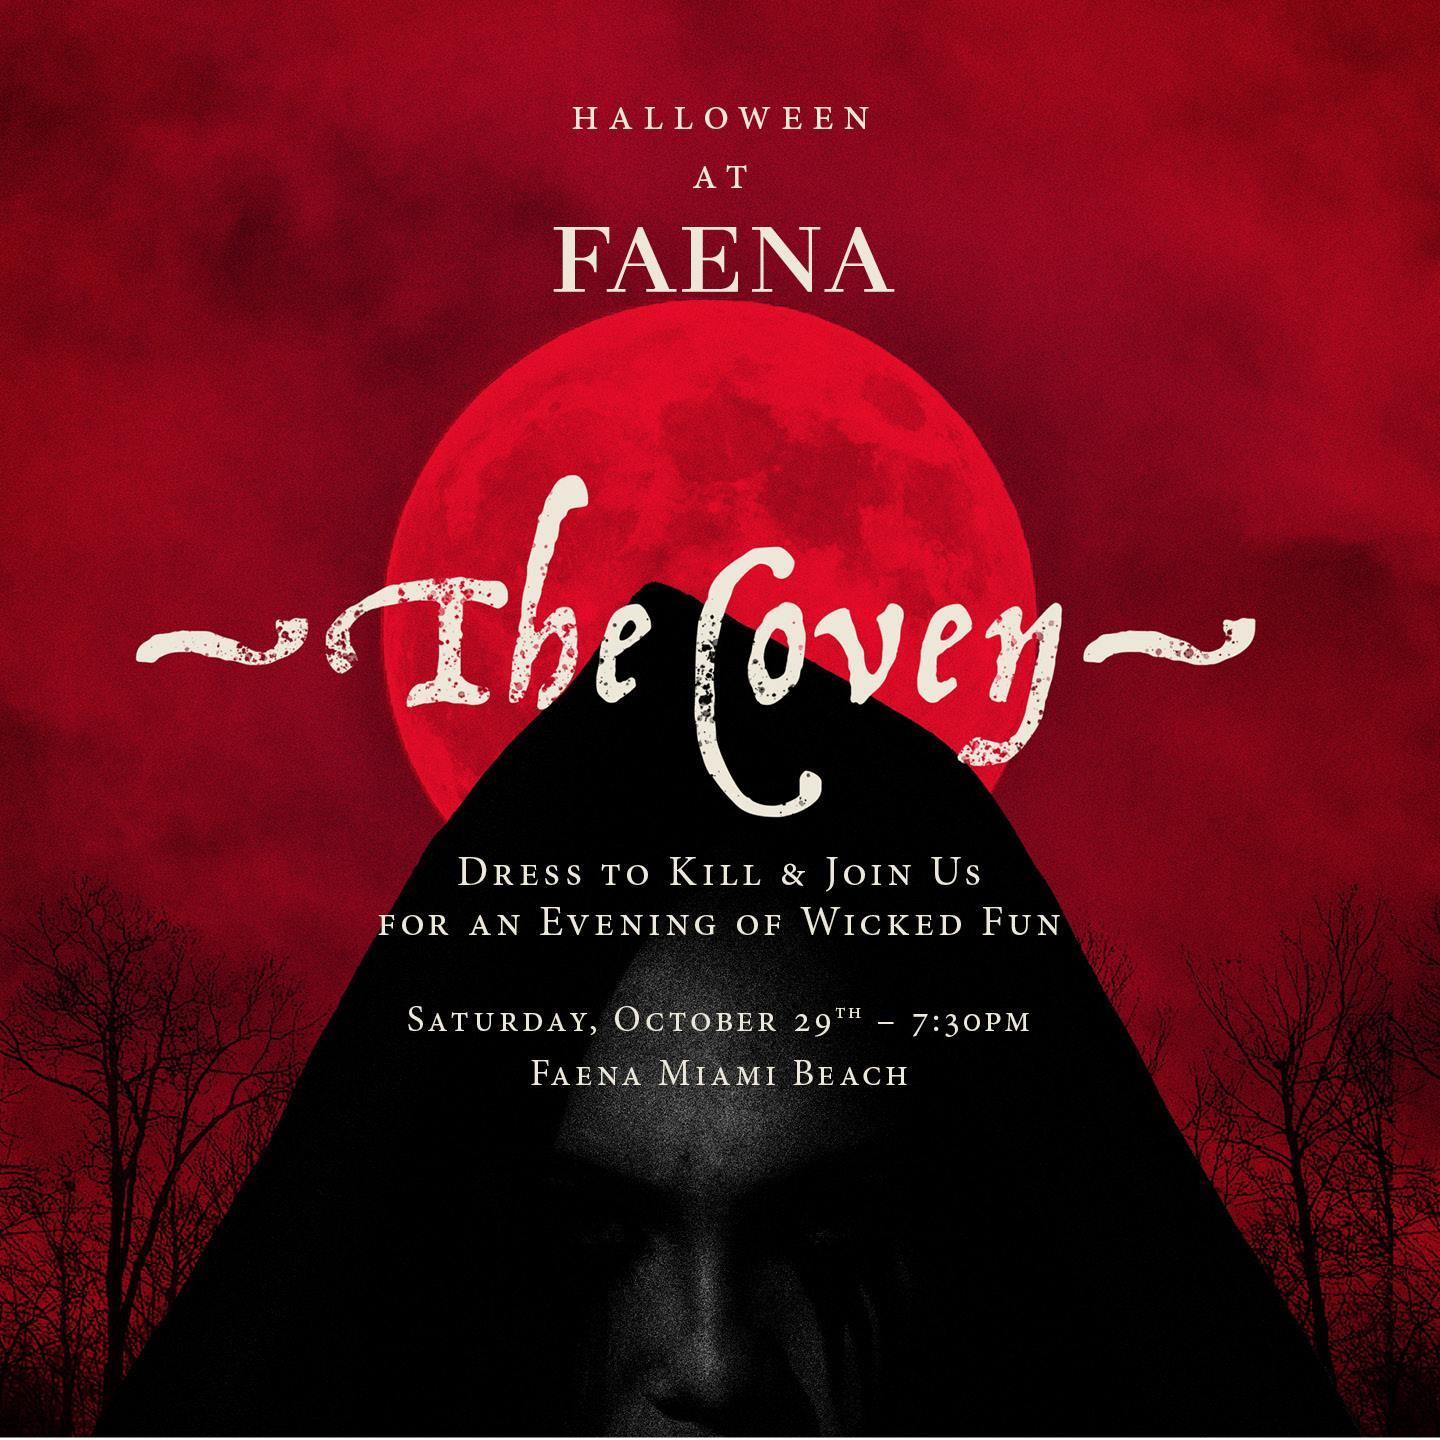 The Coven Halloween at Faena 